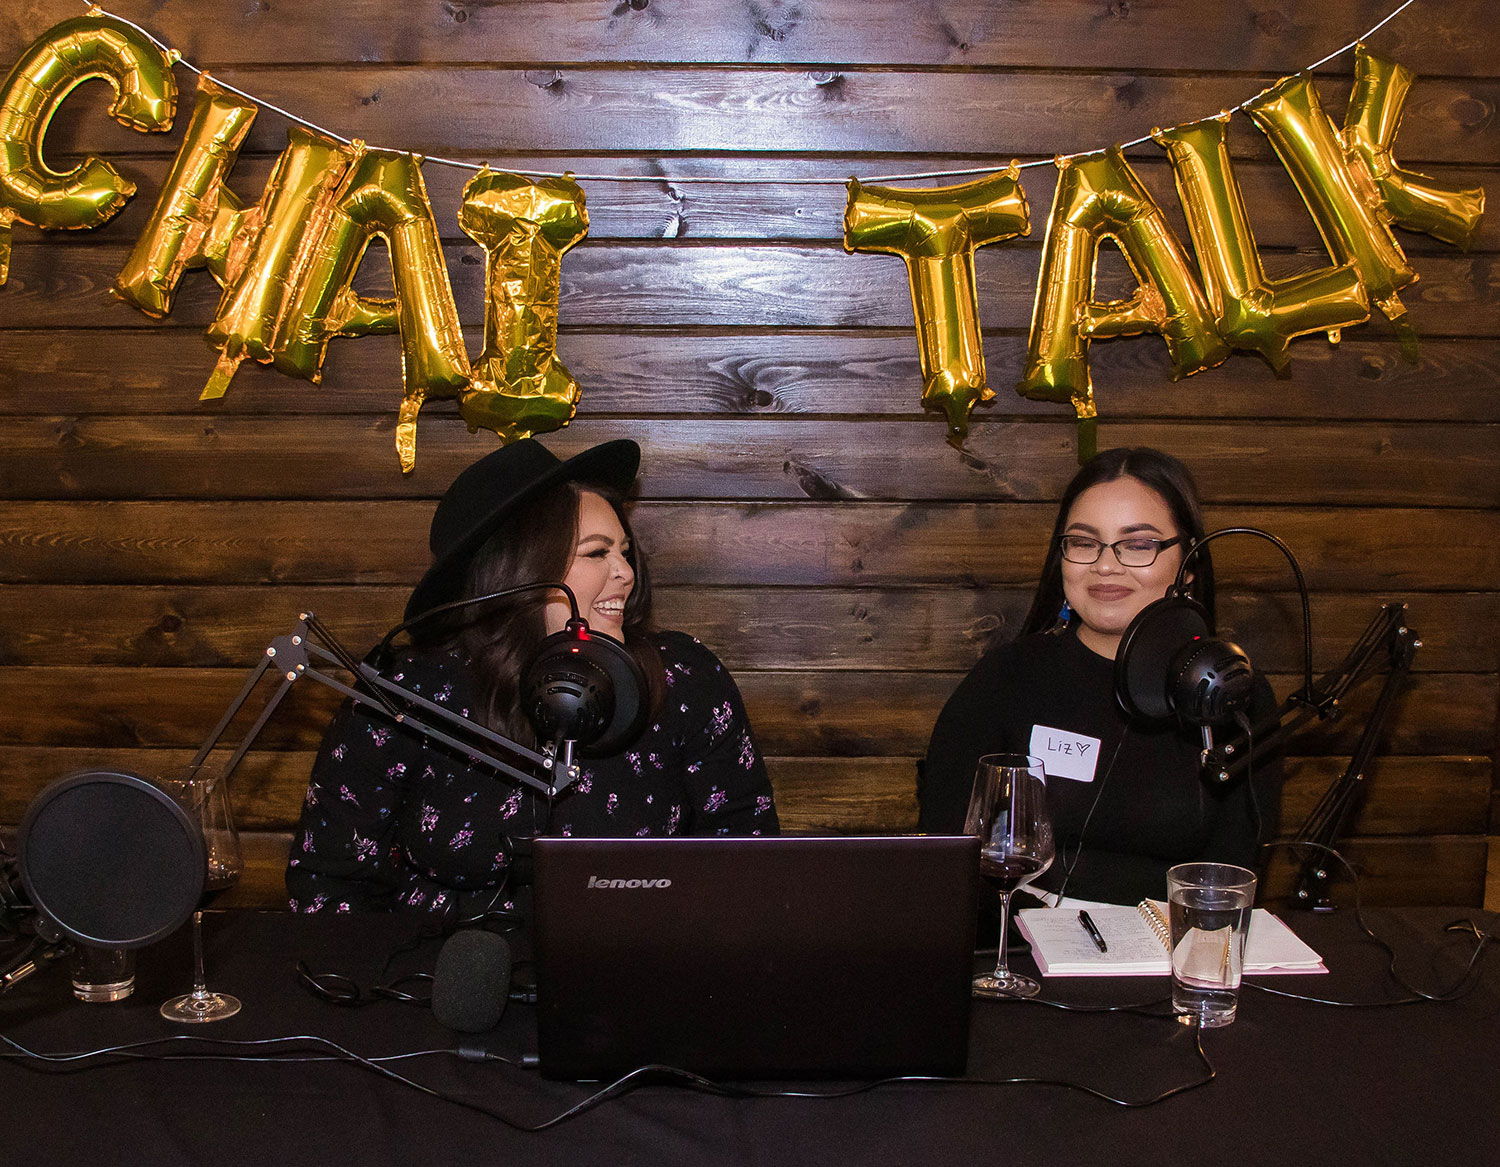 Lizeth Cuyan and Melanie Rodriguez of the Modern Day Mujeres podcast at a Chai Talk Pro event in 2019 